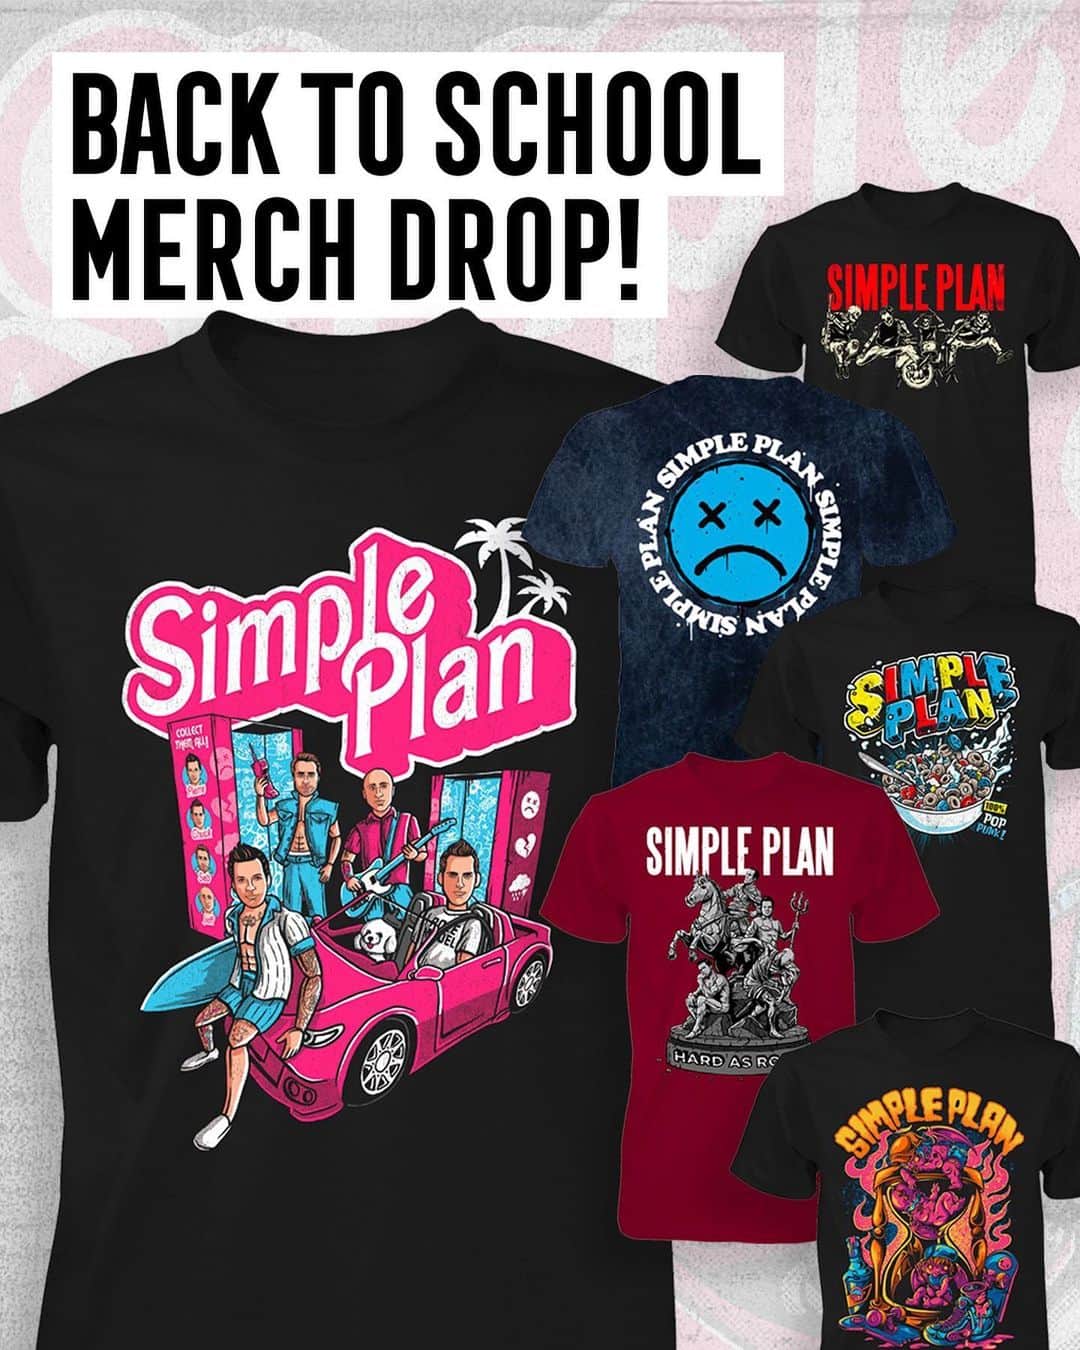 Simple Planのインスタグラム：「ICYMI: We dropped a bunch of rad new merch designs in our online store yesterday! Along with Pierre’s epic Simple Plan Dolls shirt, we’ve added 5 more brand new awesome shirts that we think you’ll love! 🤩🤩🤩  Check them out at simpleplanstore.com and grab your fave before it’s gone! Which one do your have you eye on? 👀👀👀」